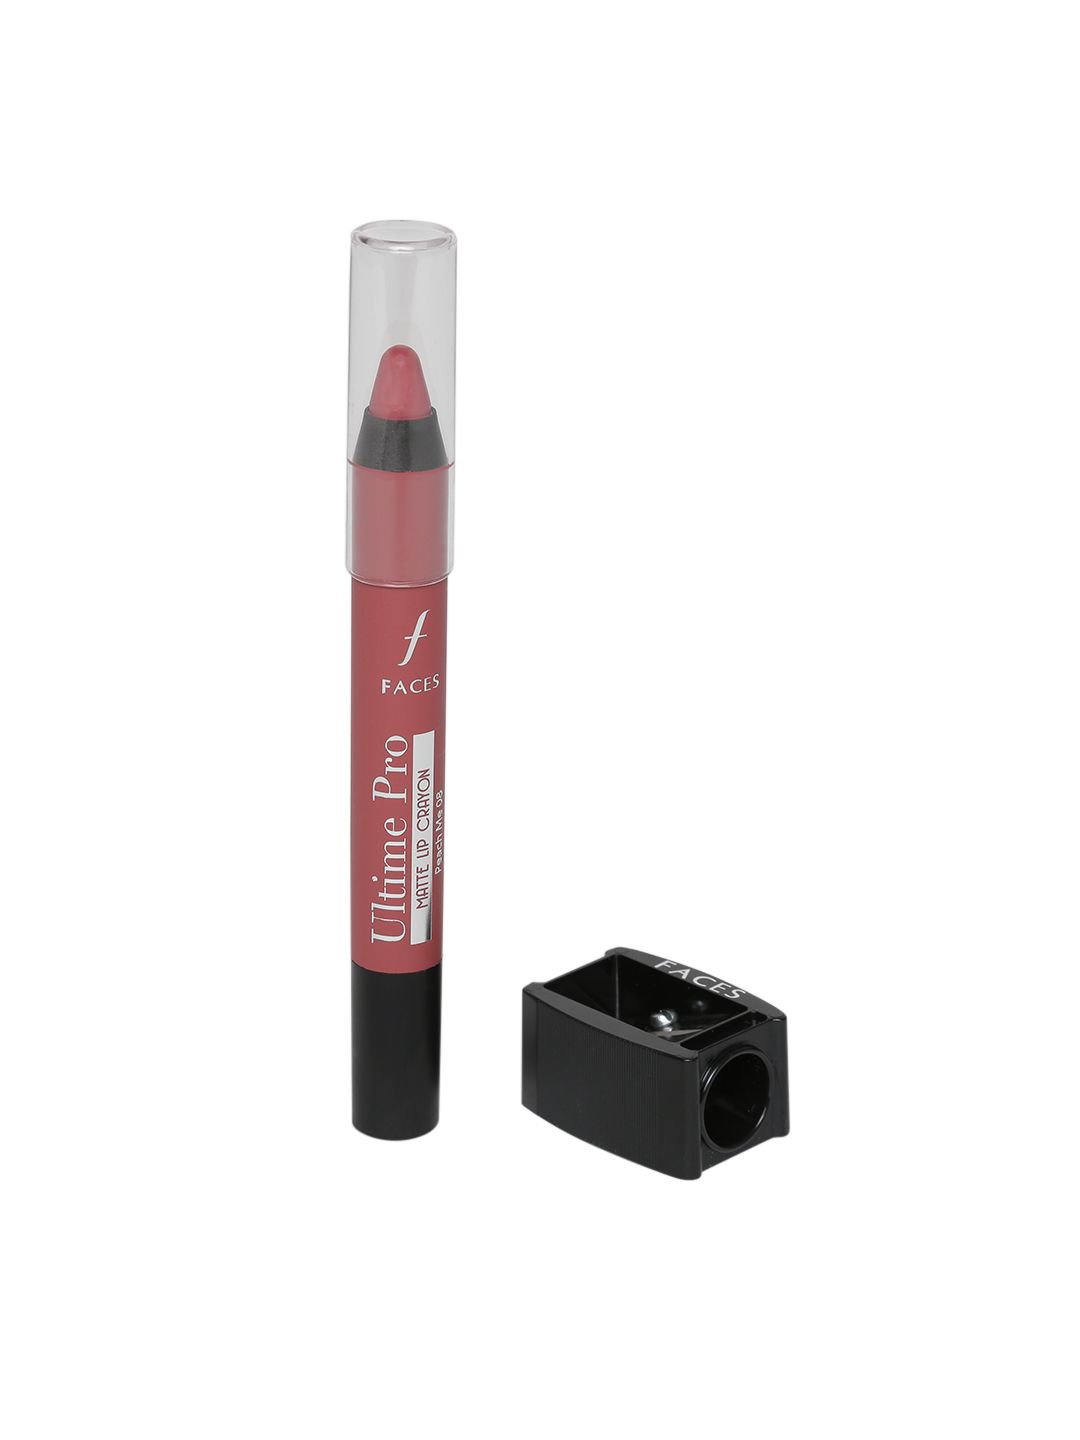 FACES CANADA Ultime Pro Peach Me Matte Lip Crayon 08 Price in India